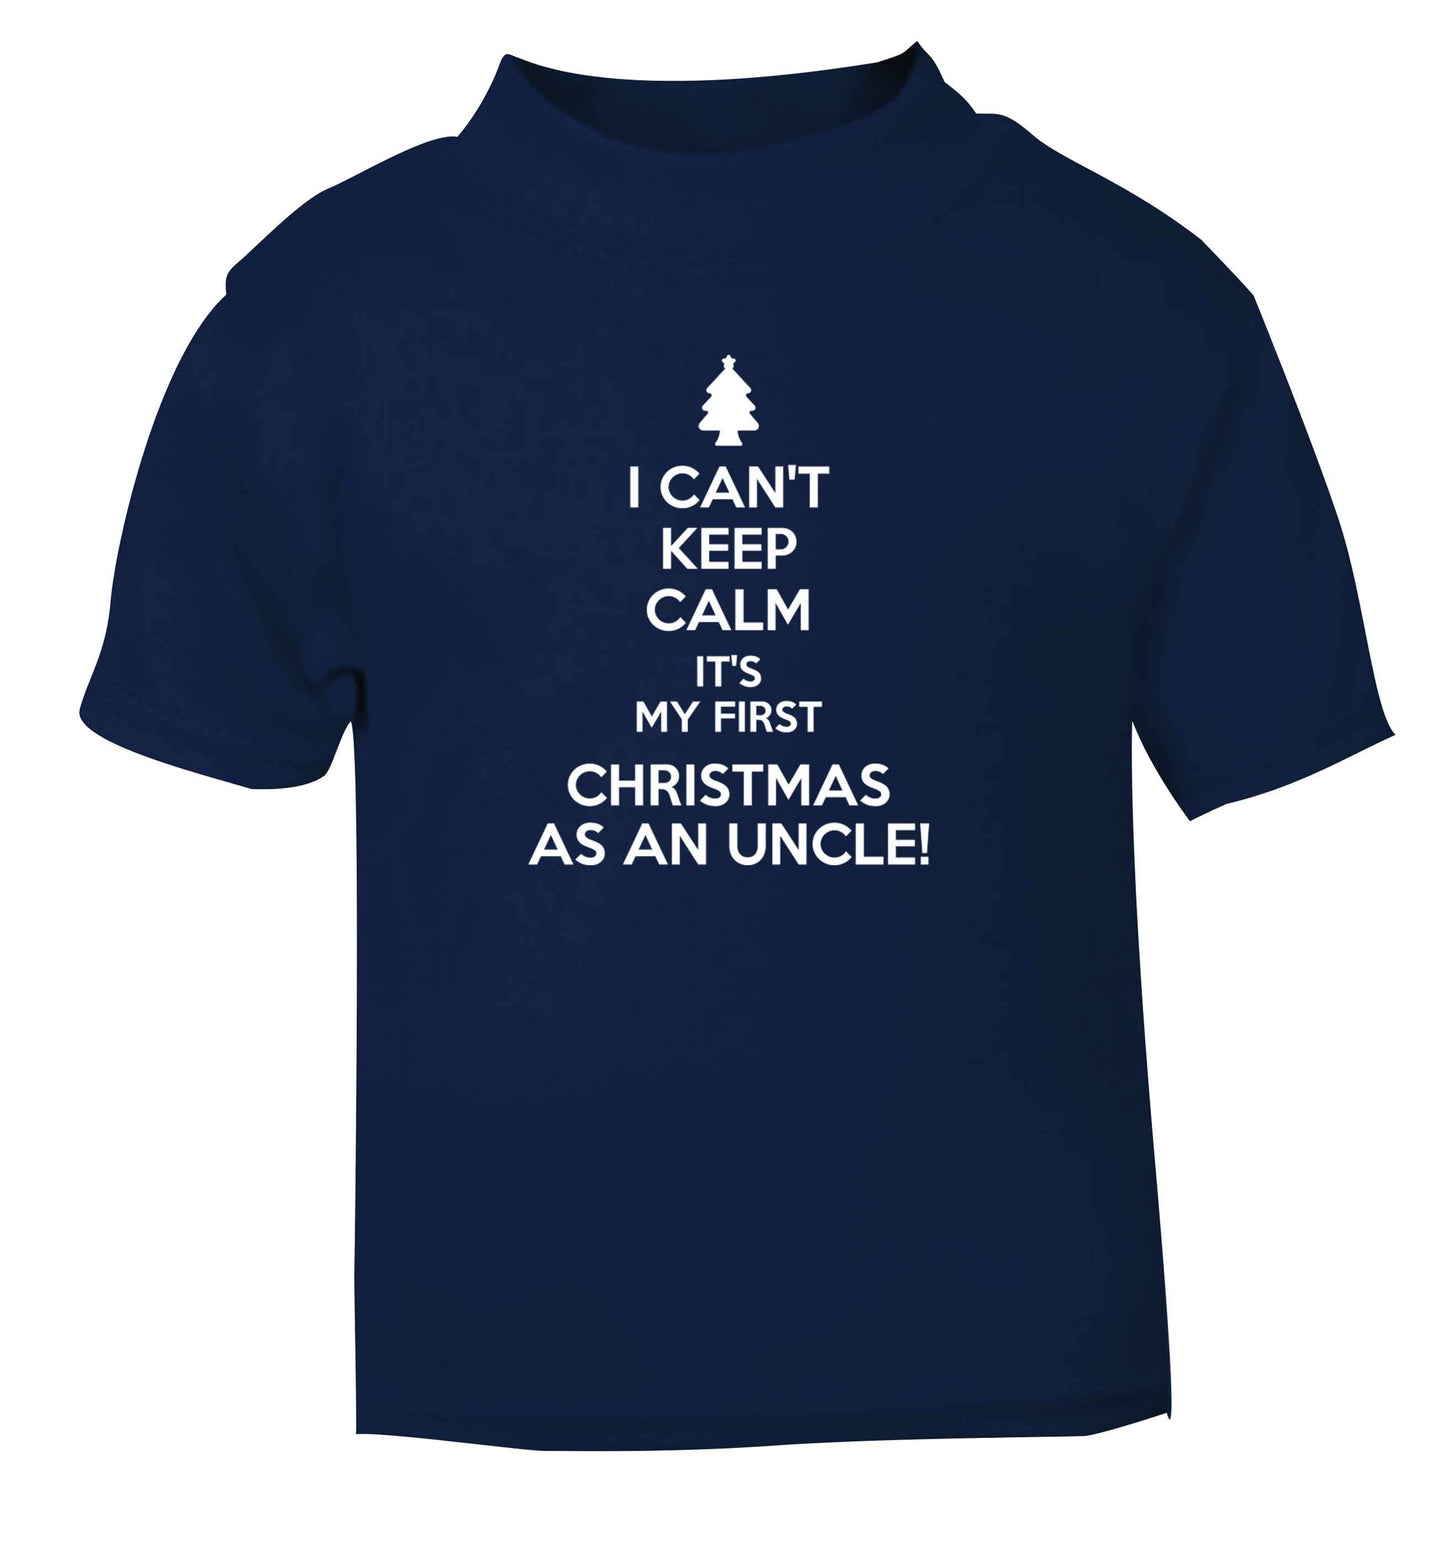 I can't keep calm it's my first Christmas as an uncle! navy Baby Toddler Tshirt 2 Years